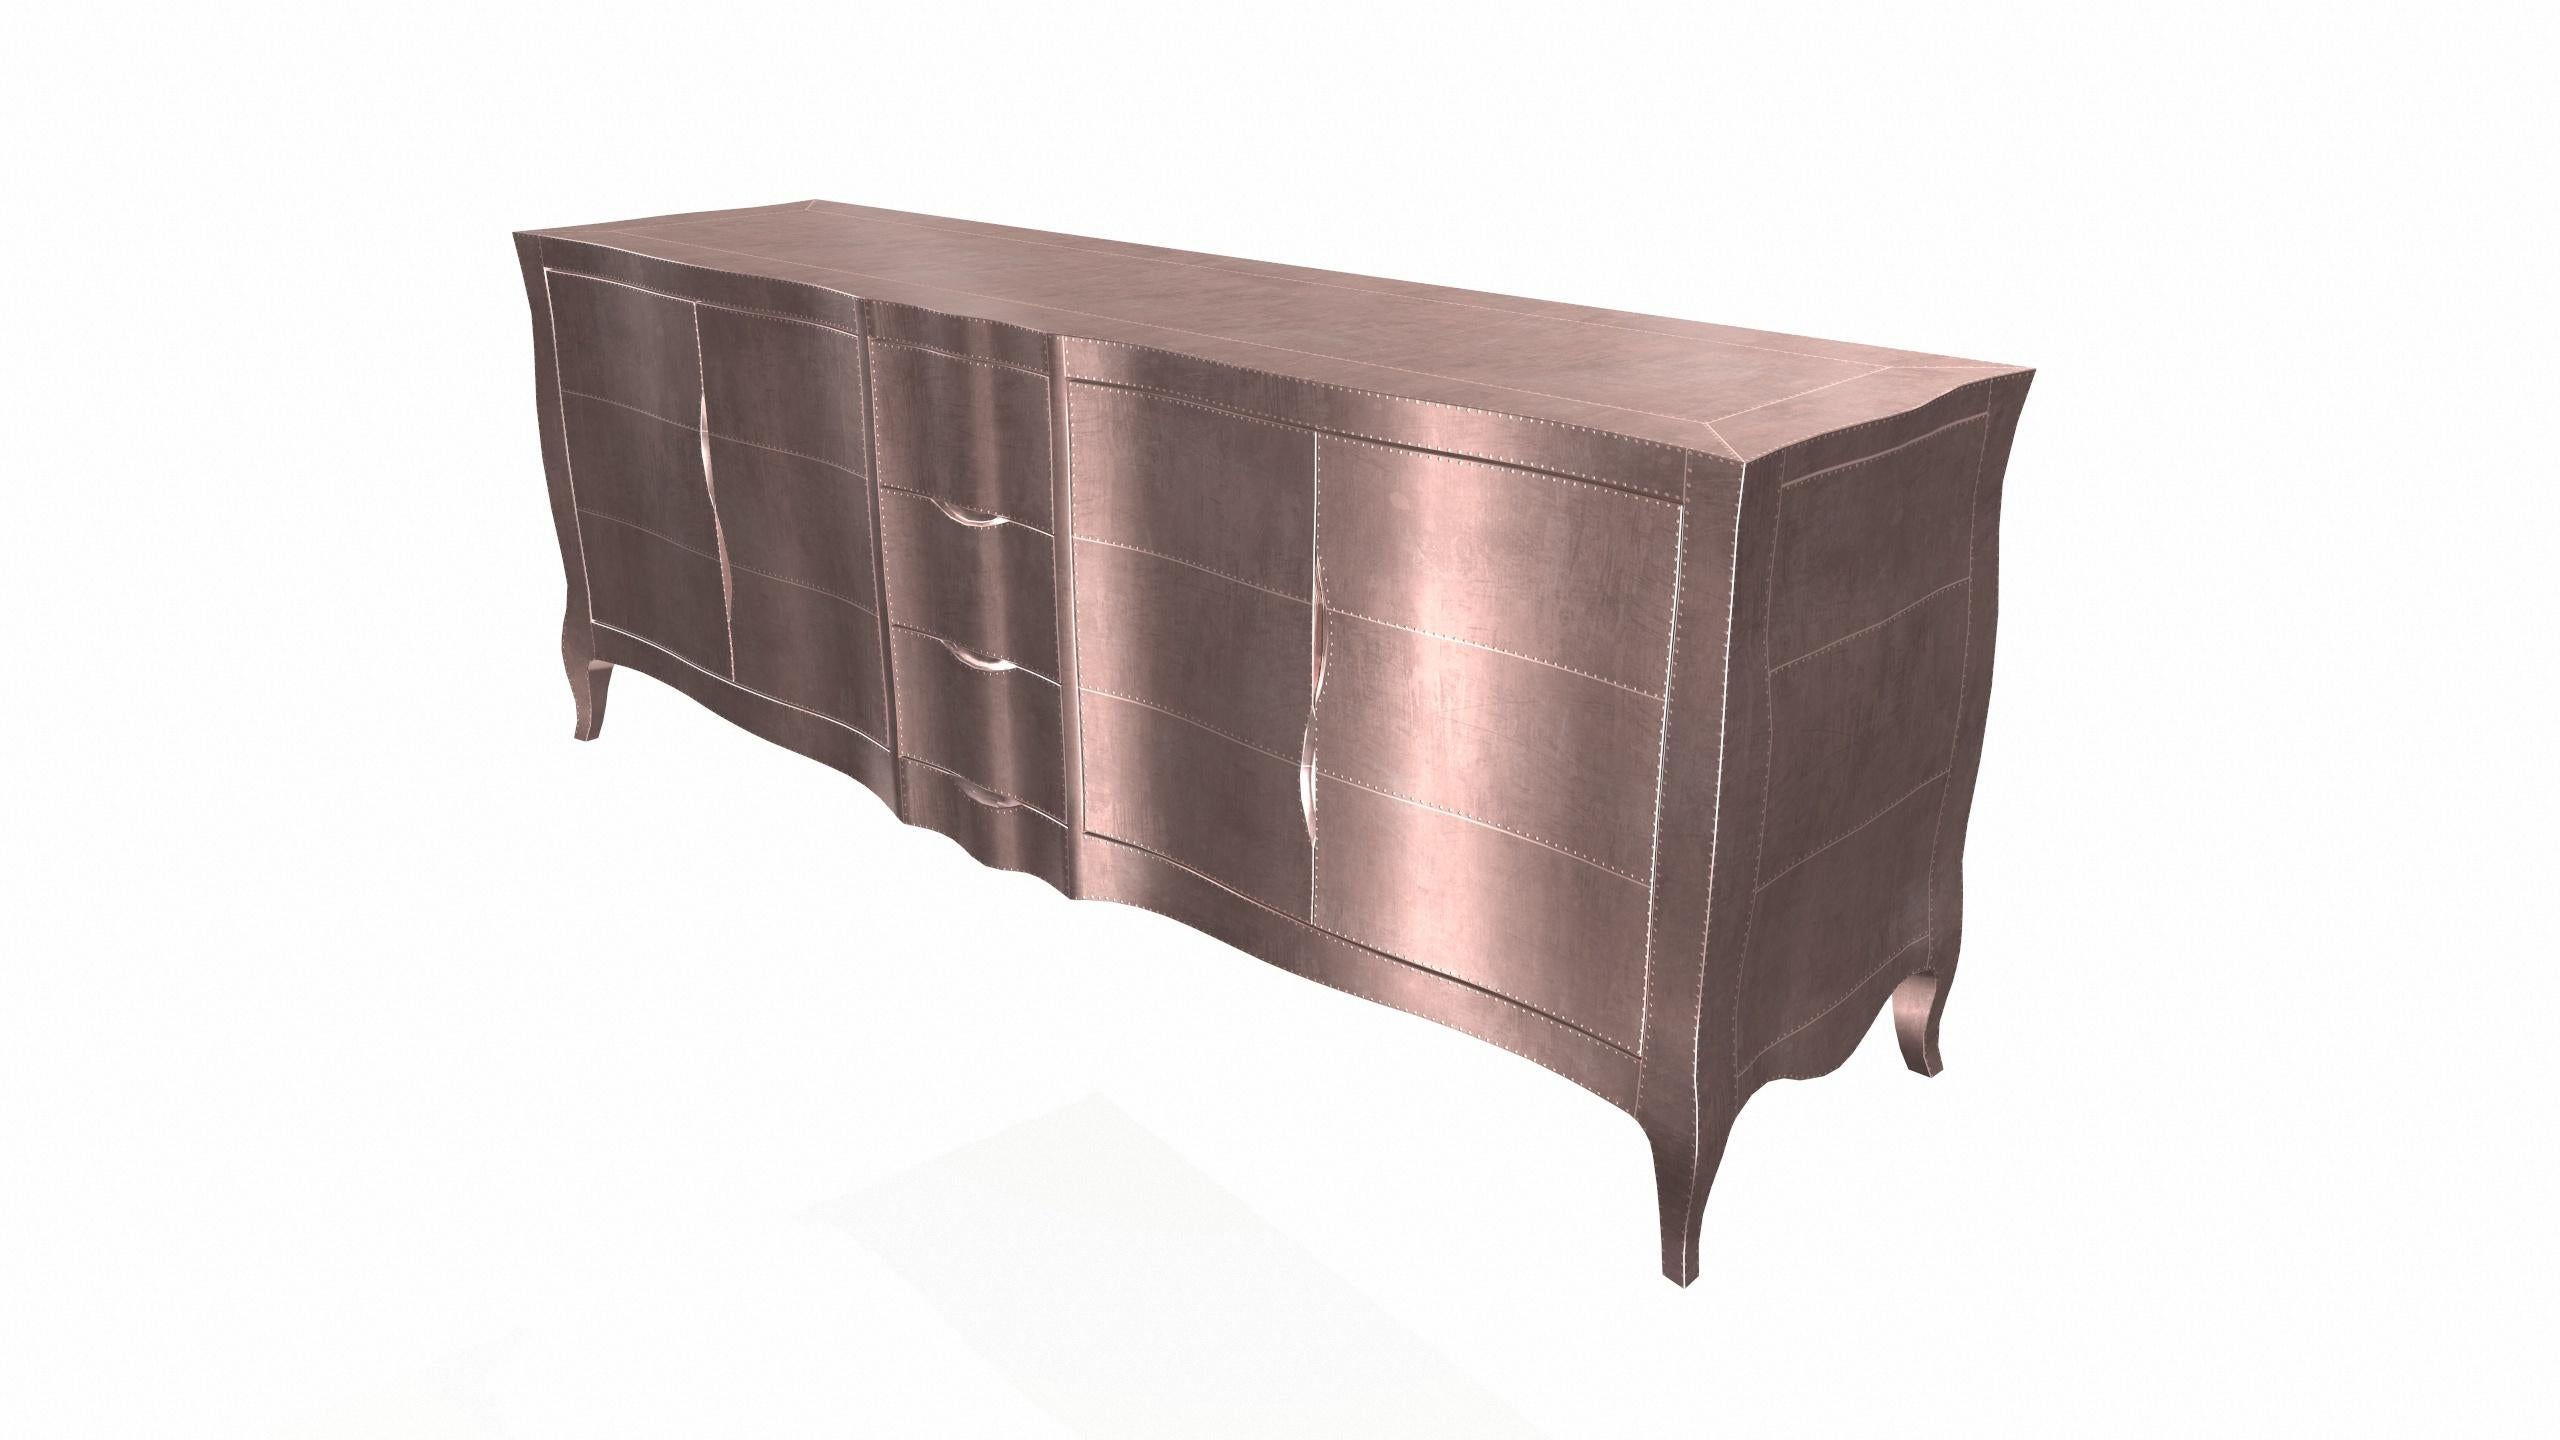 American Louise Credenza Art Deco Bookcases in Smooth Copper by Paul Mathieu  For Sale